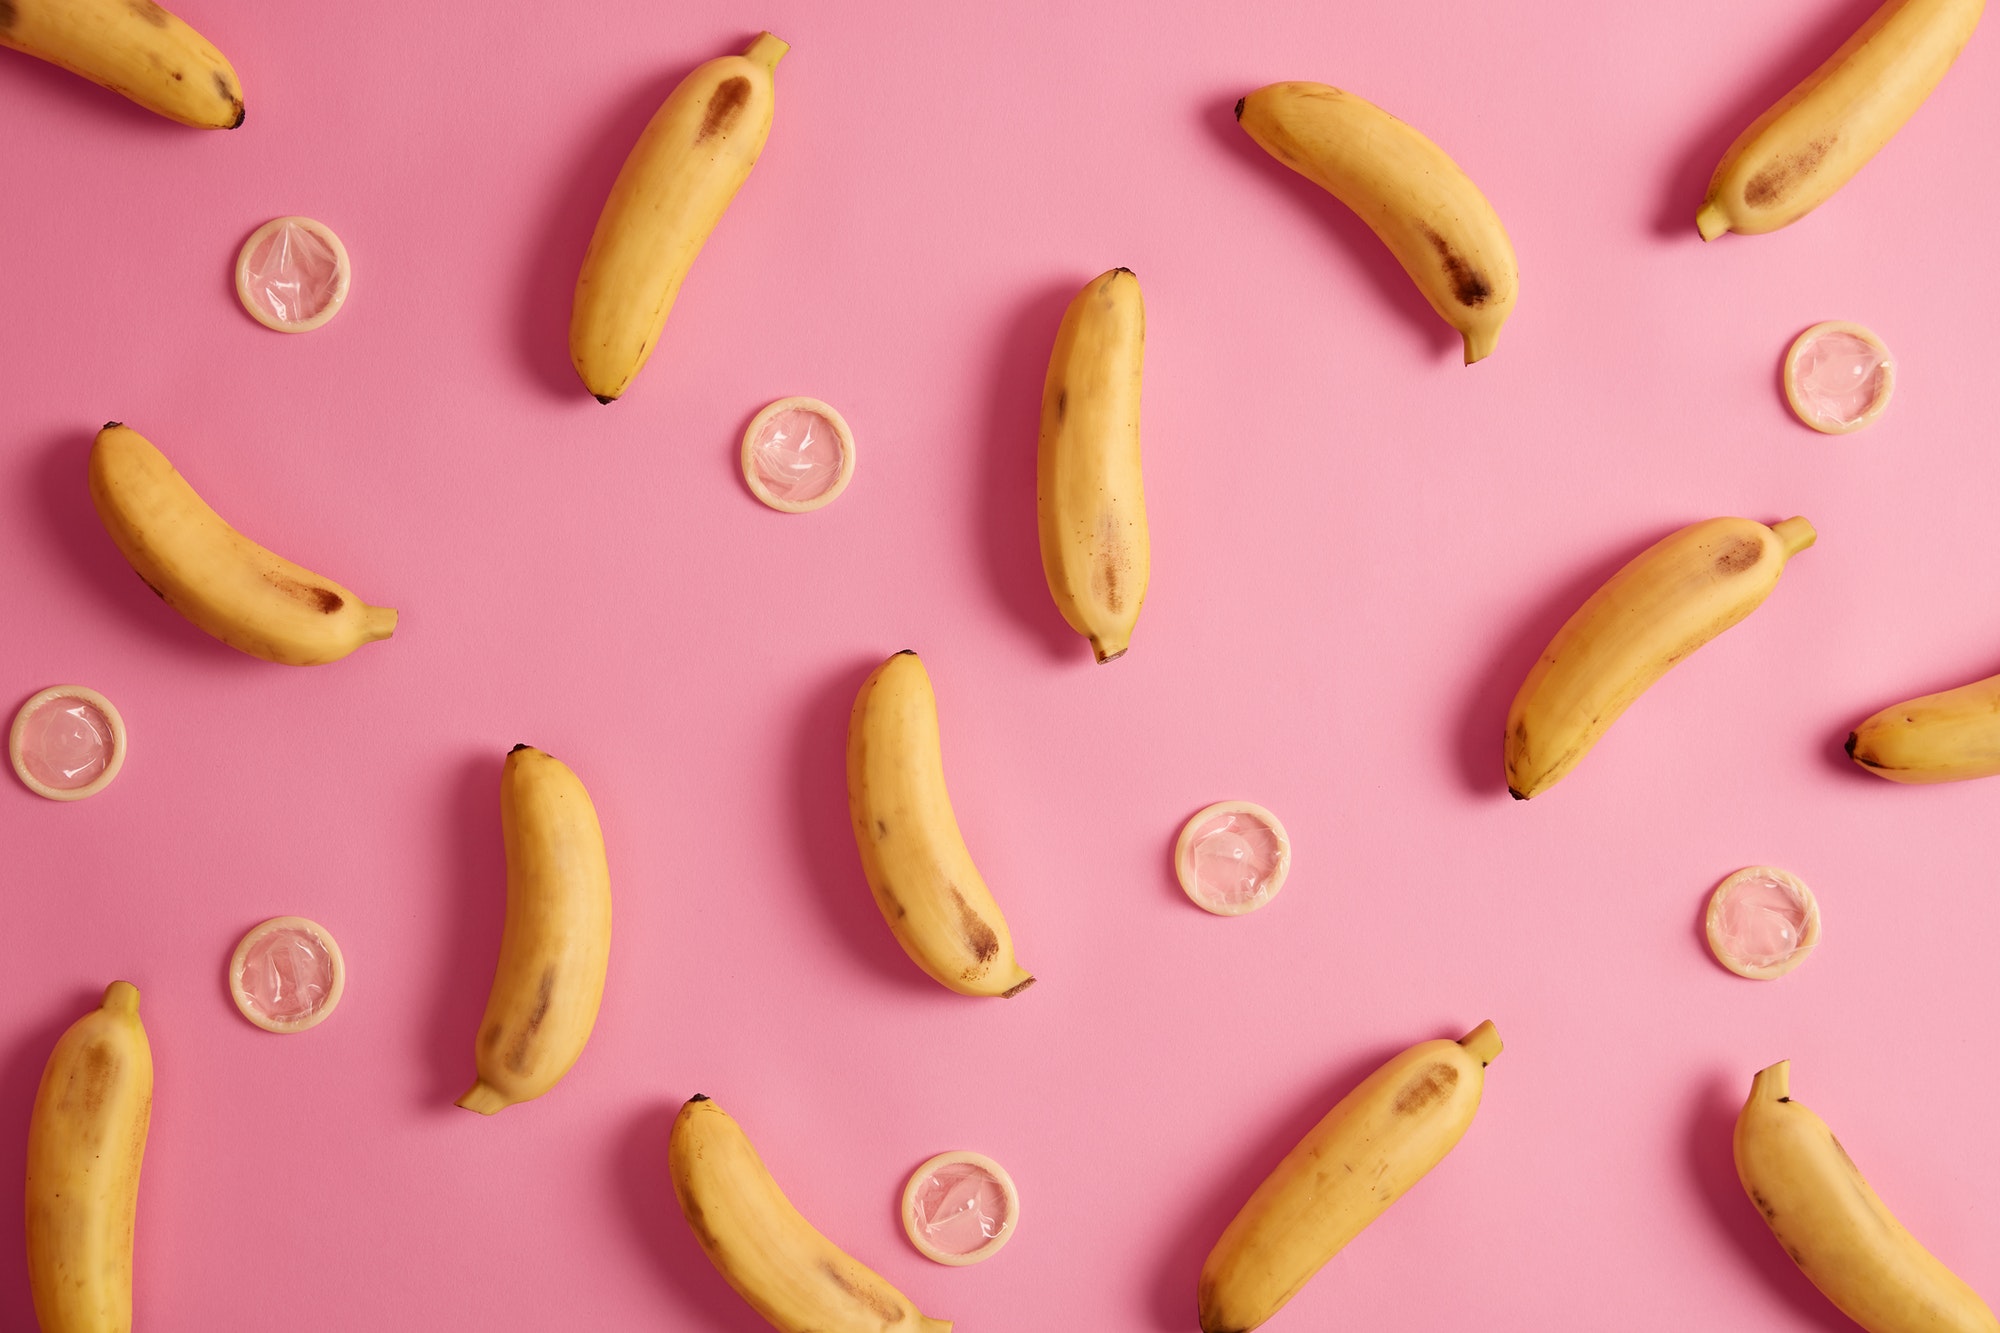 Bananas and contraceptives on pink background. Tropical flavored condom for safe relationship. Elimi